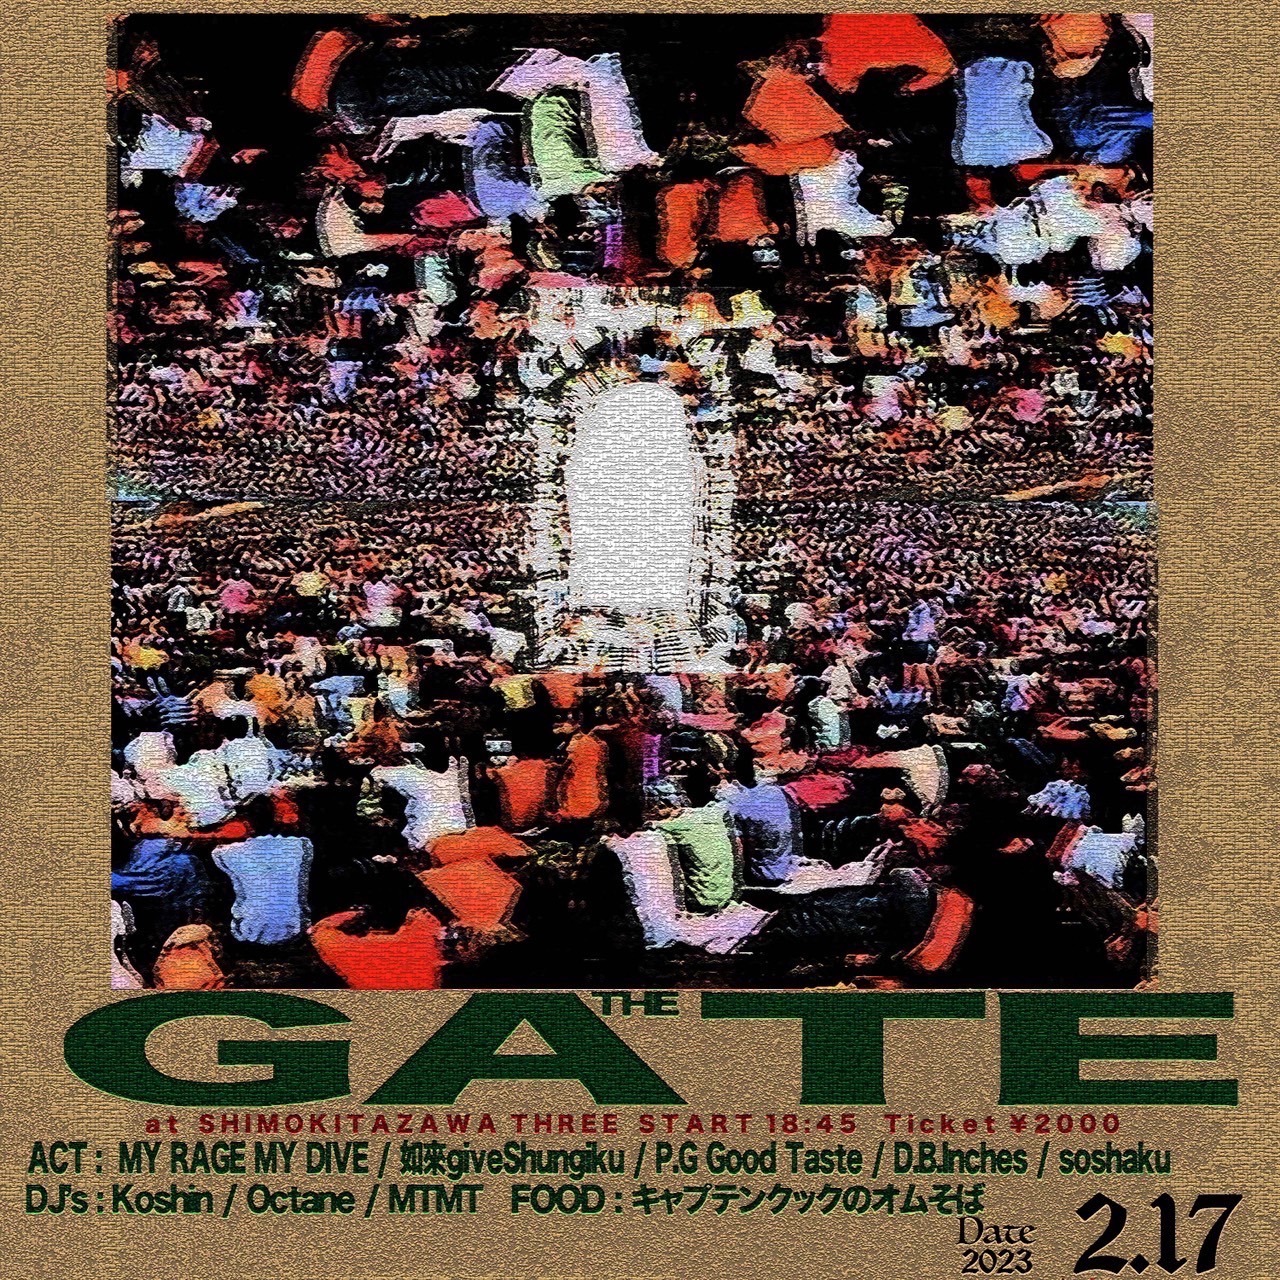 MONTHLY REGULAR EVENT 『THE GATE vol.11』